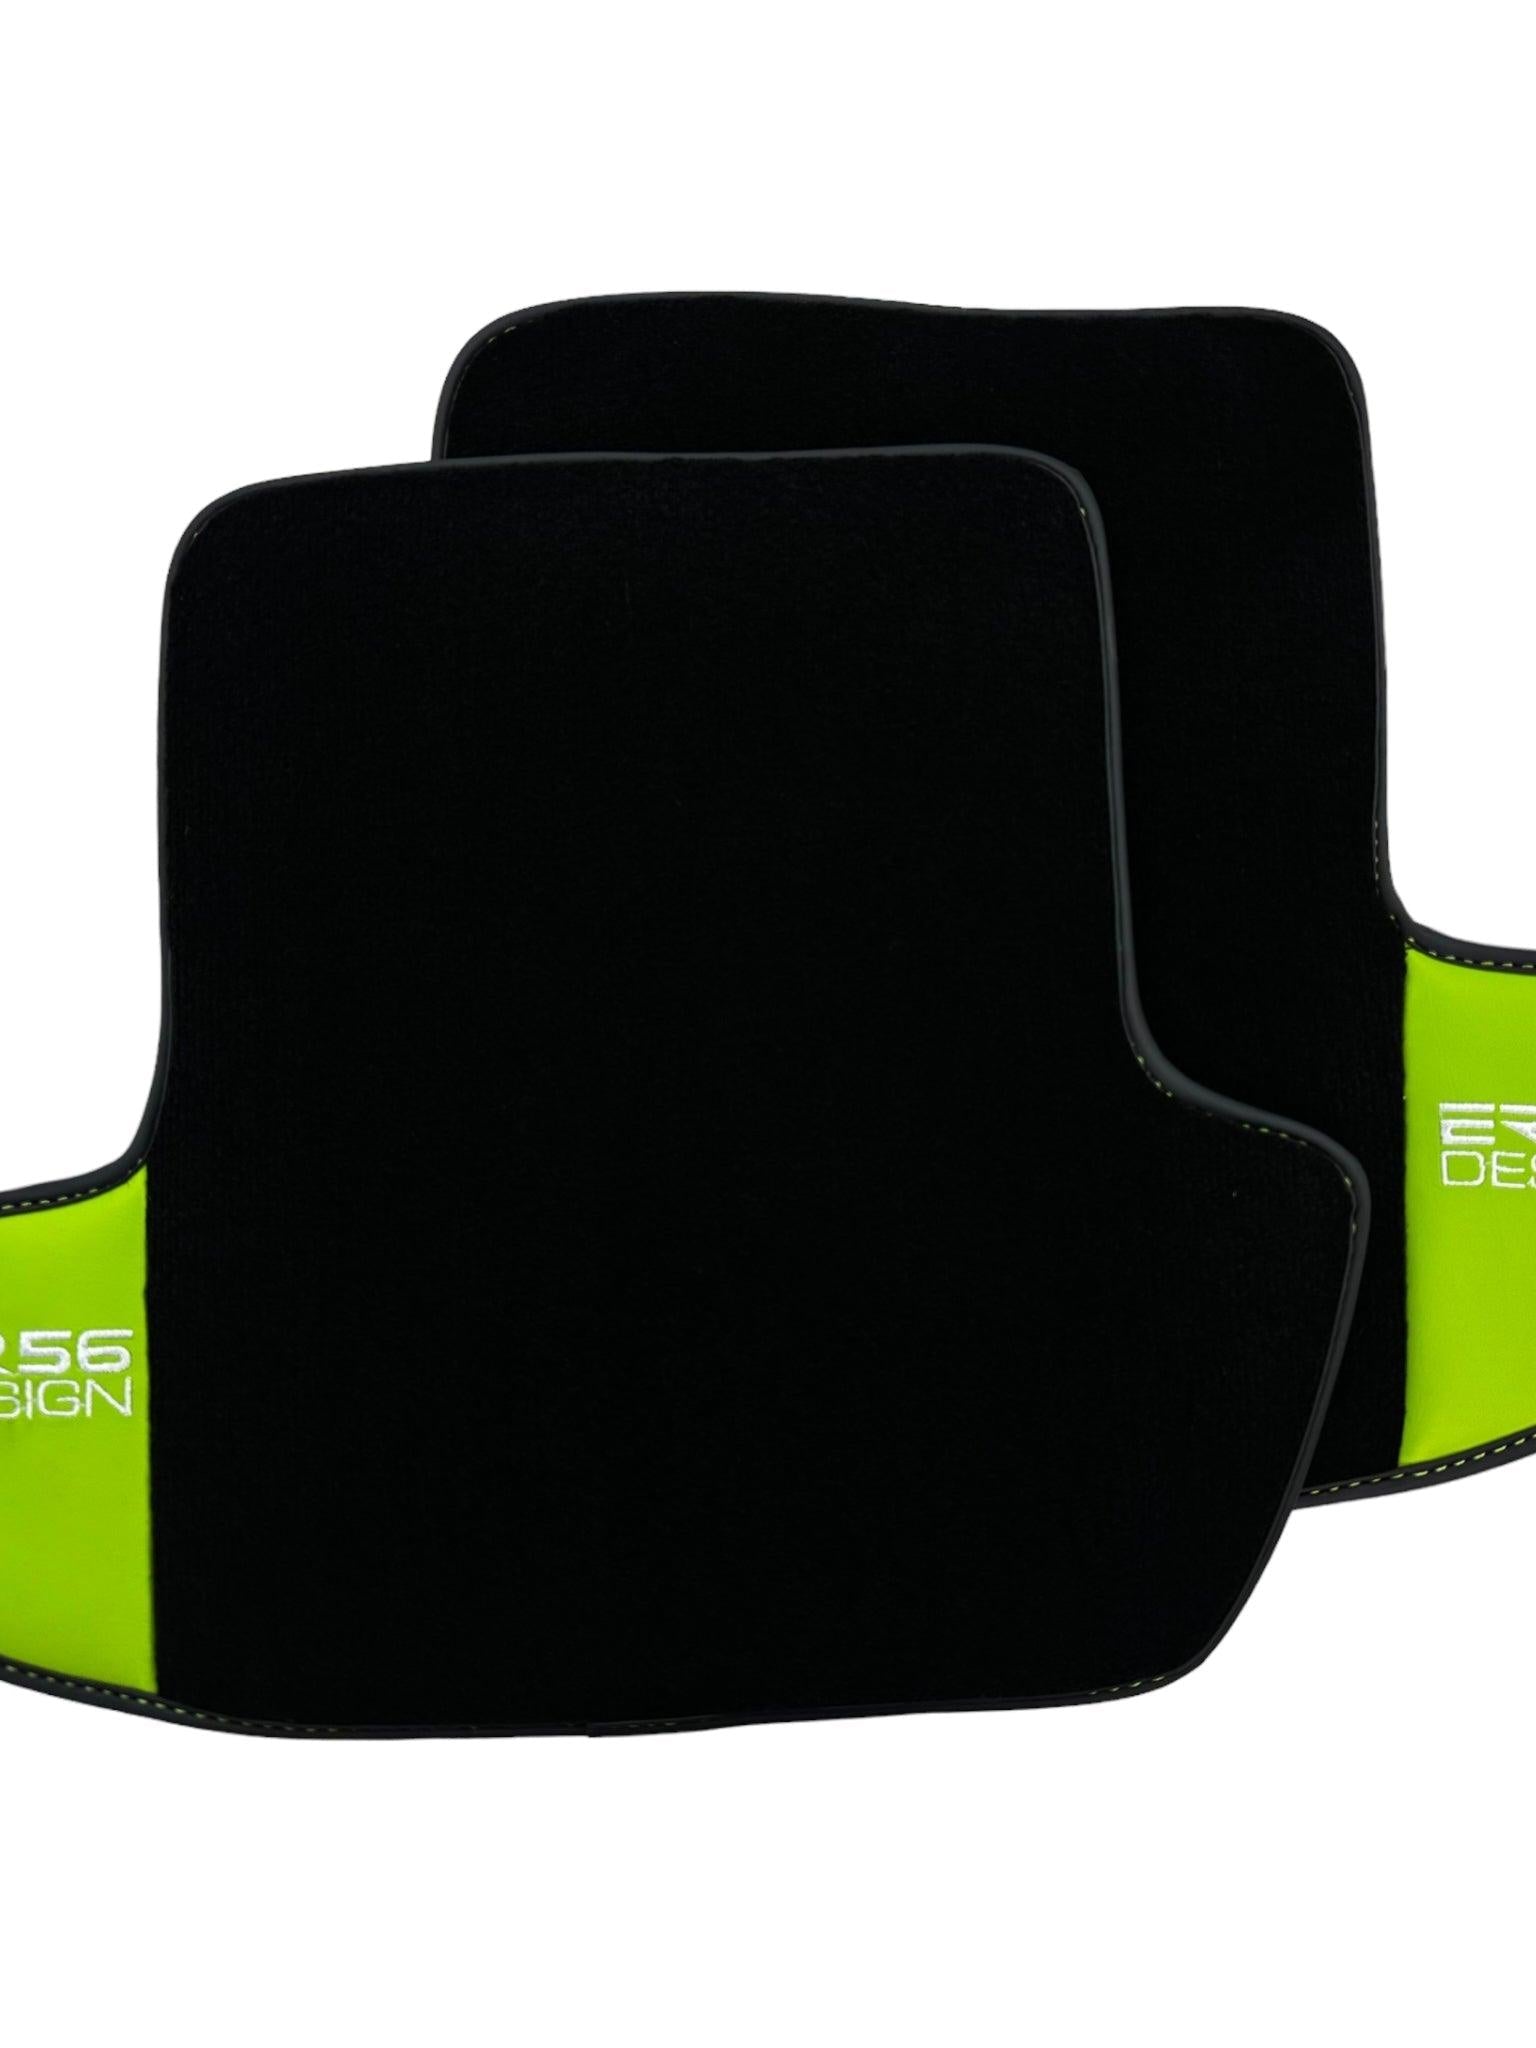 Black Floor Mats for Porsche Taycan (2019-2023) with Green Leather ER56 Design - AutoWin